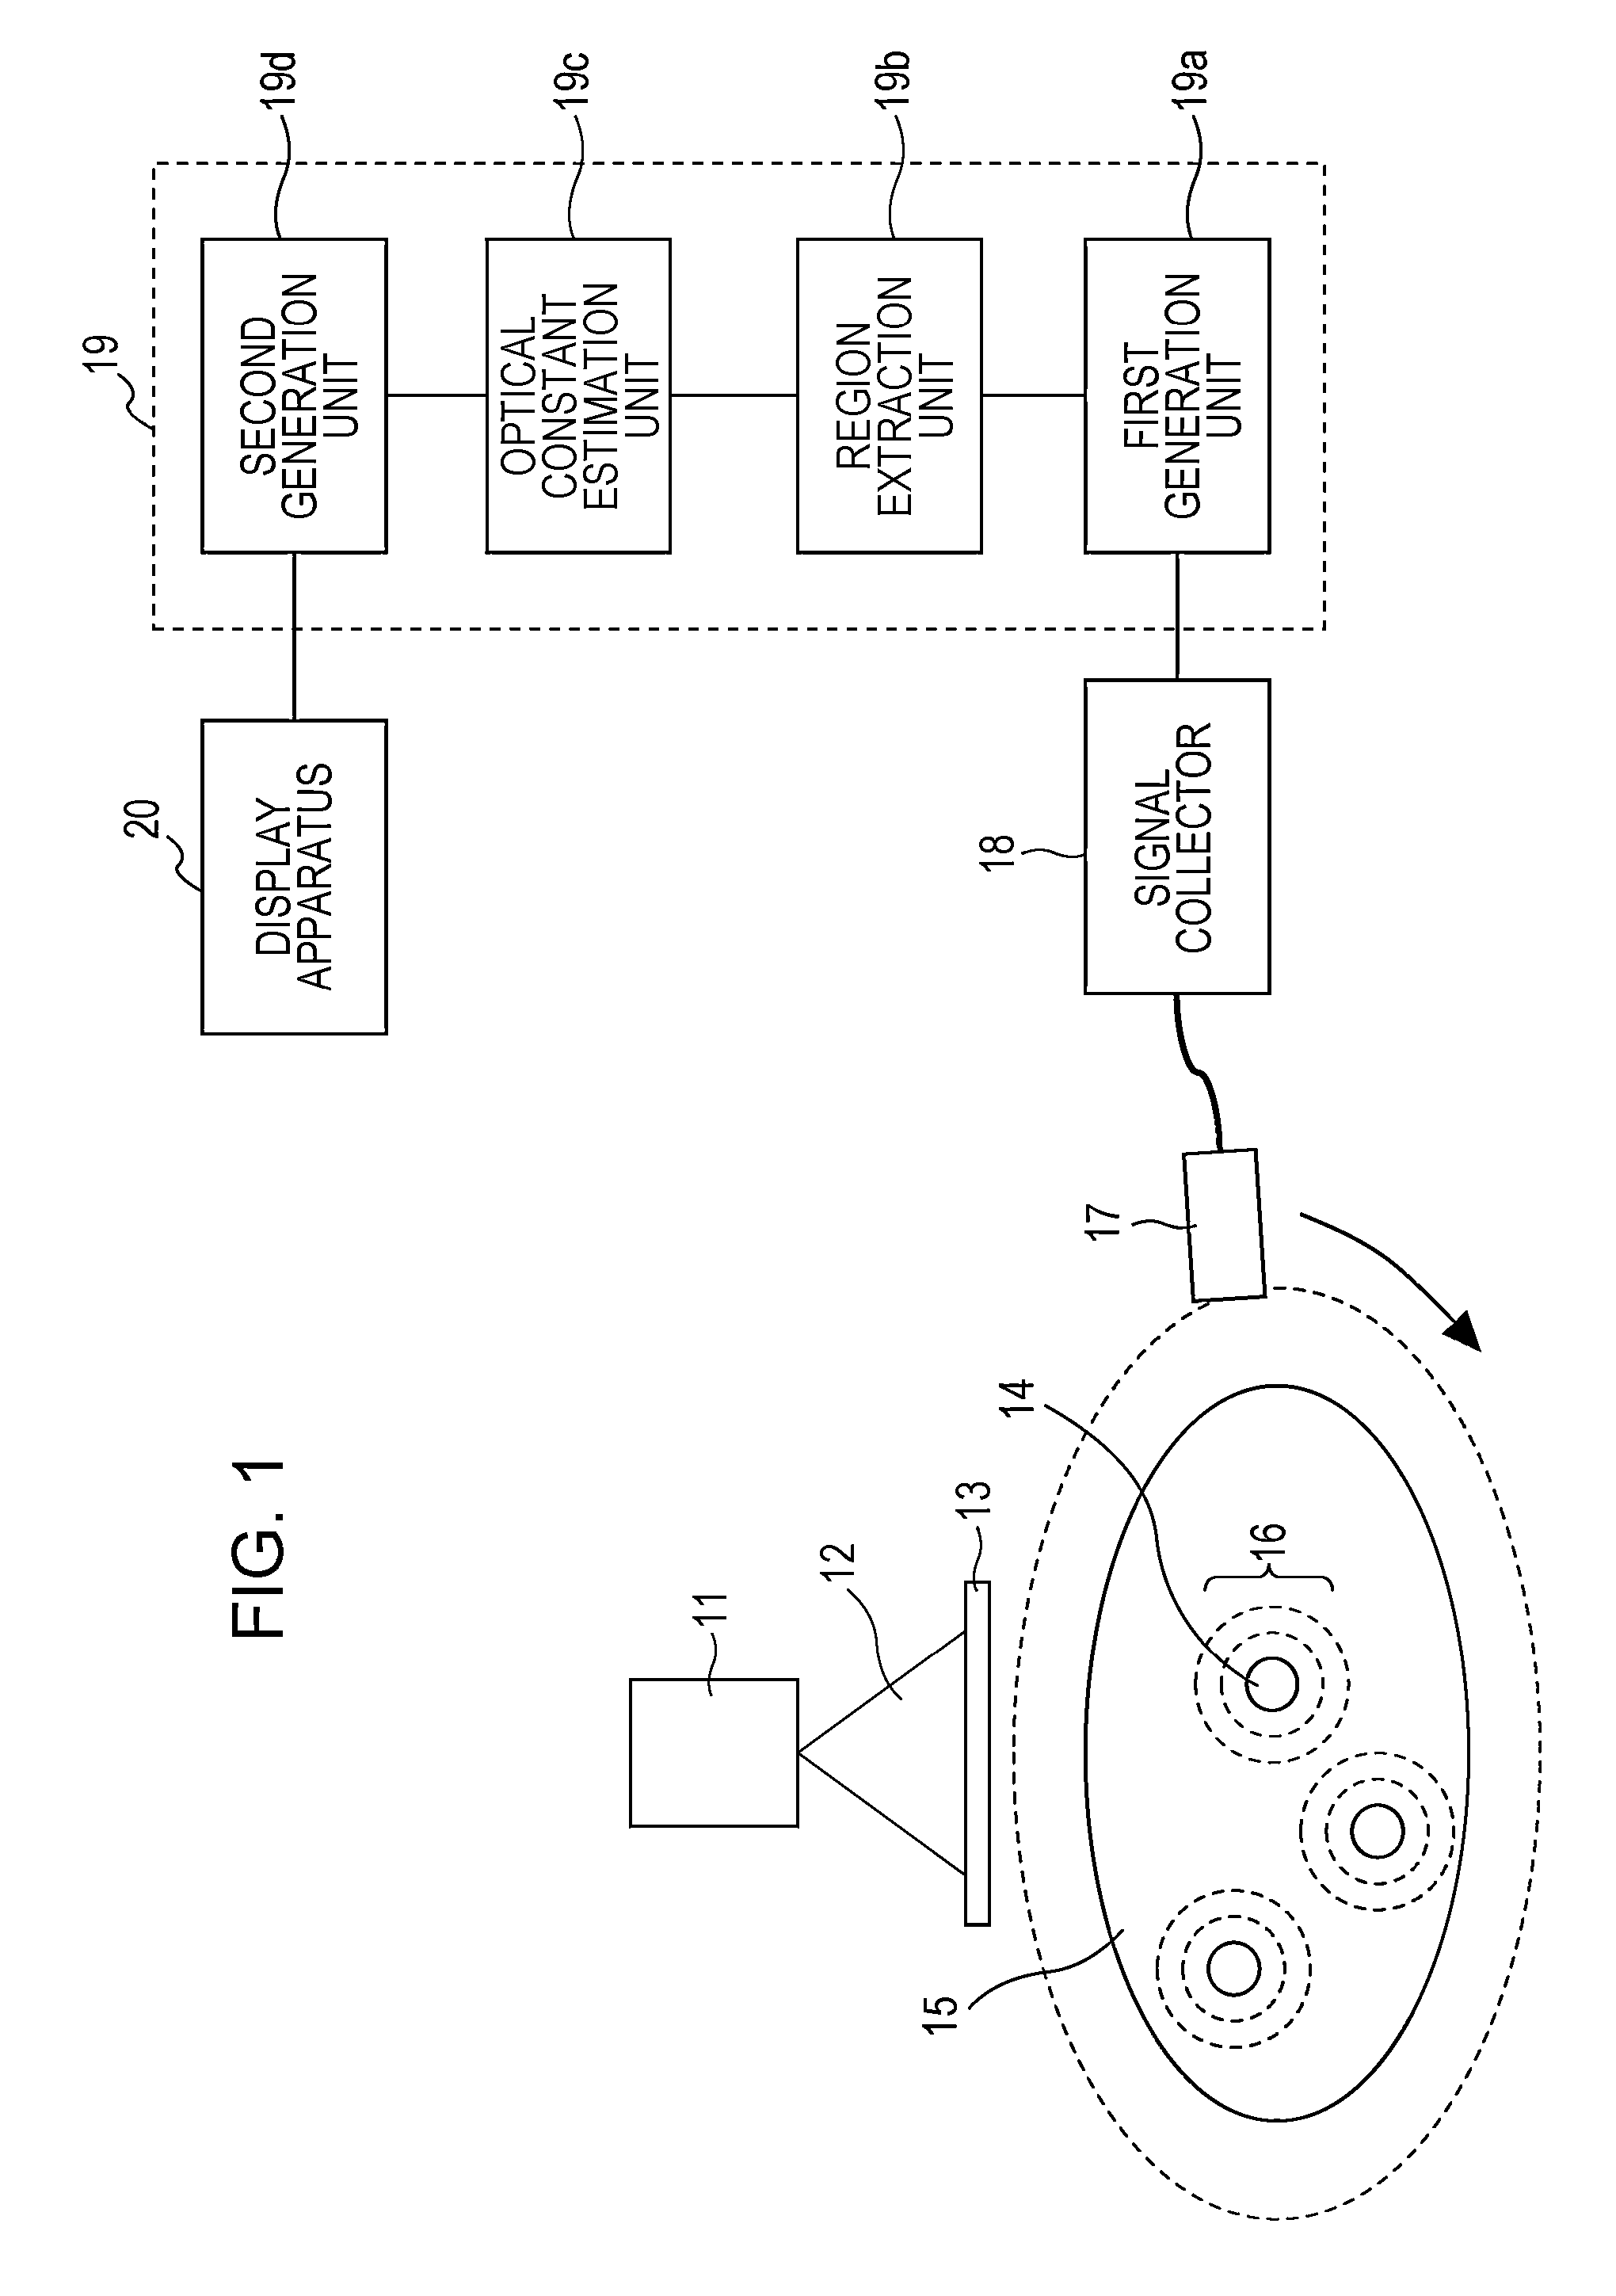 Specimen information acquisition apparatus and method therefor